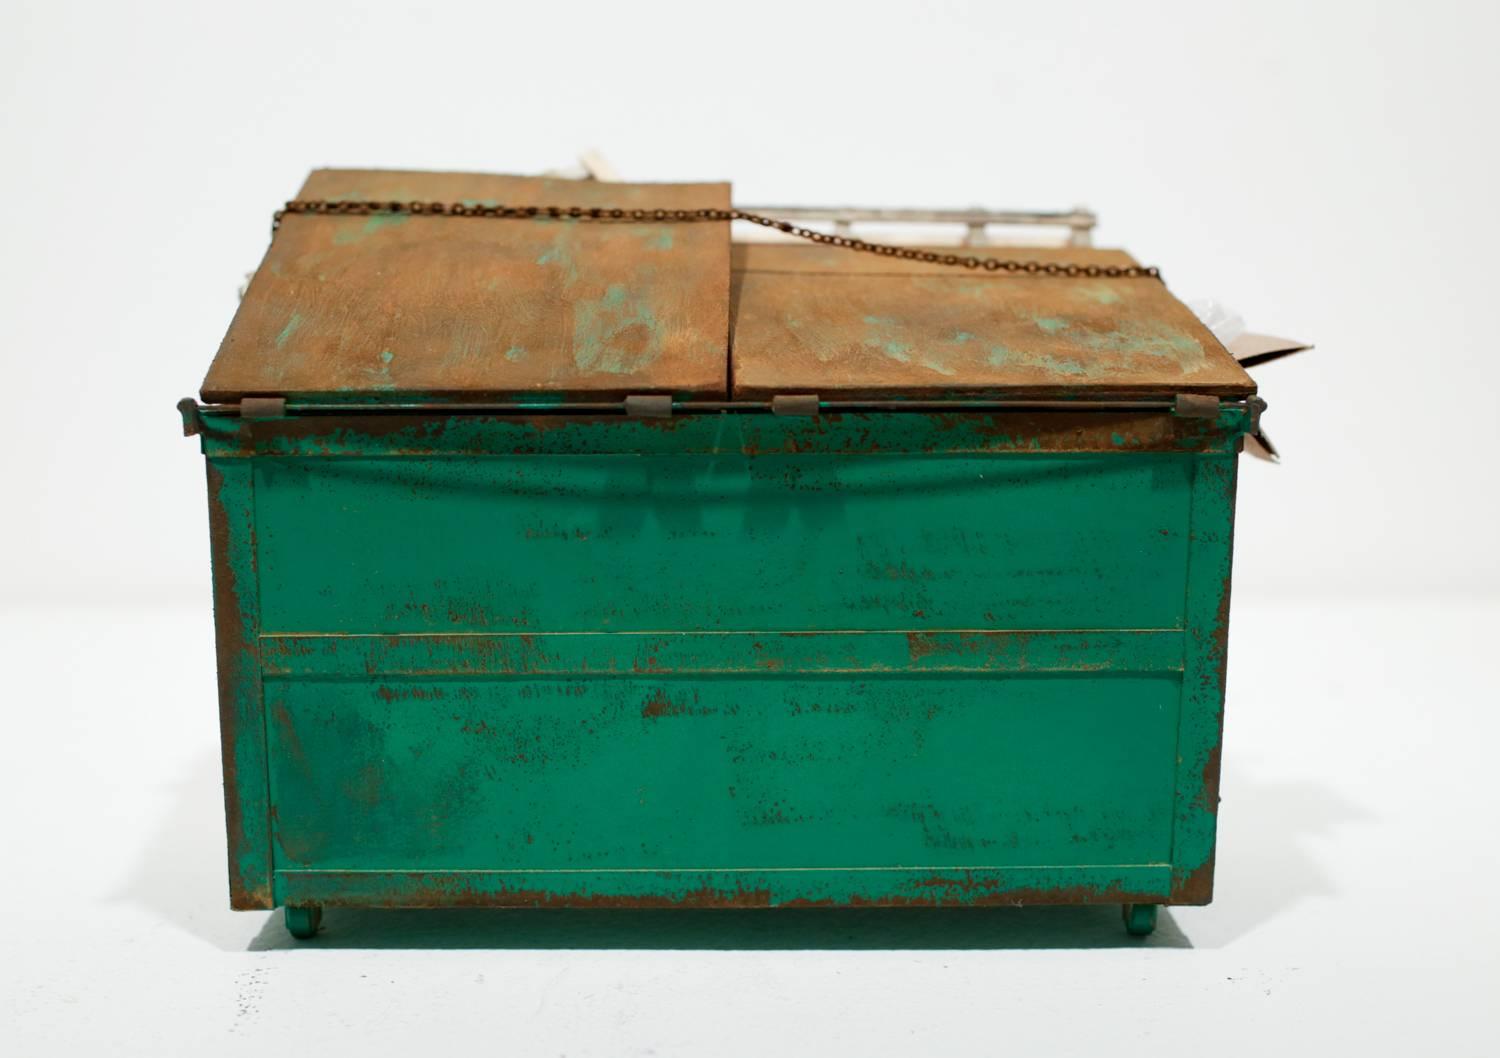 Original miniature dumpster paper sculpture by Drew Leshko measuring 5”h x 7”w x 4”d. 

Please send us a direct message if you need expedited shipping.

About the Artist // Drew Leshko is a Philadelphia, Pennsylvania-based artist. Working from